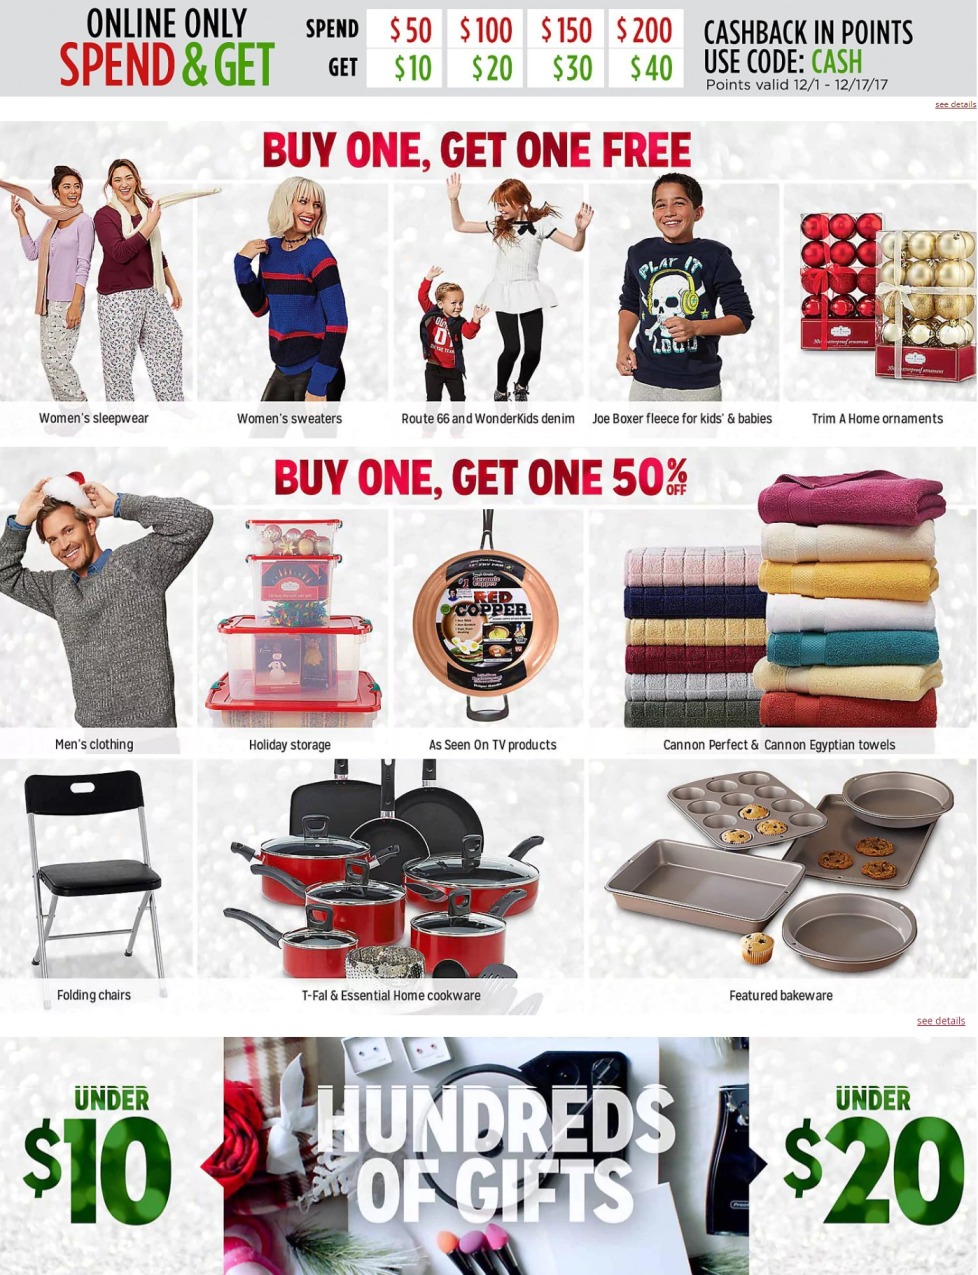 Clothing / Towels / Cookware